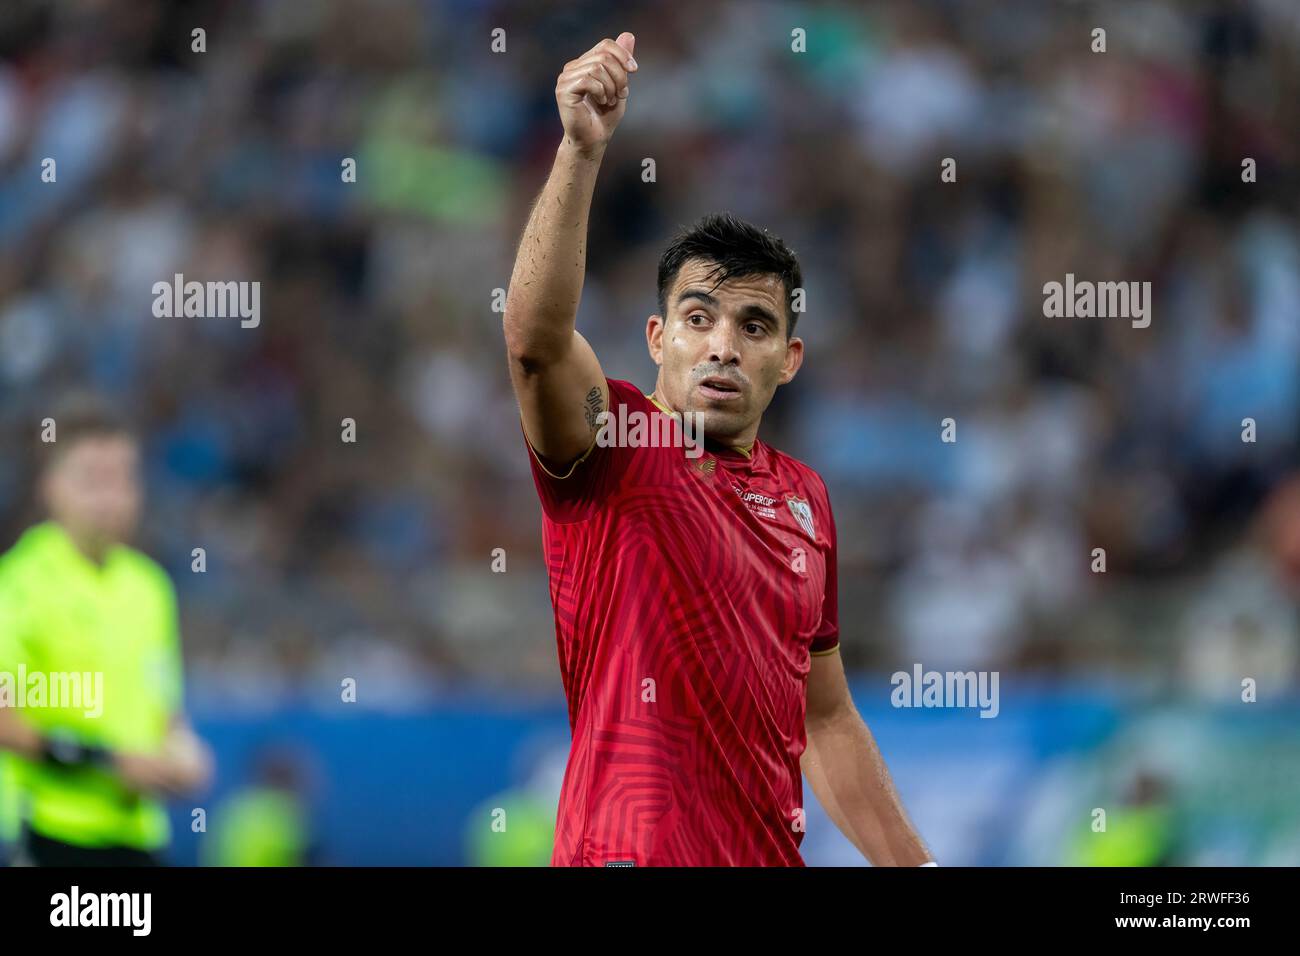 Athens, Greece - August 16,2023: Player of Marcos Acuna in action during the UEFA Super Cup Final match between Manchester City and Sevilla at Stadio Stock Photo